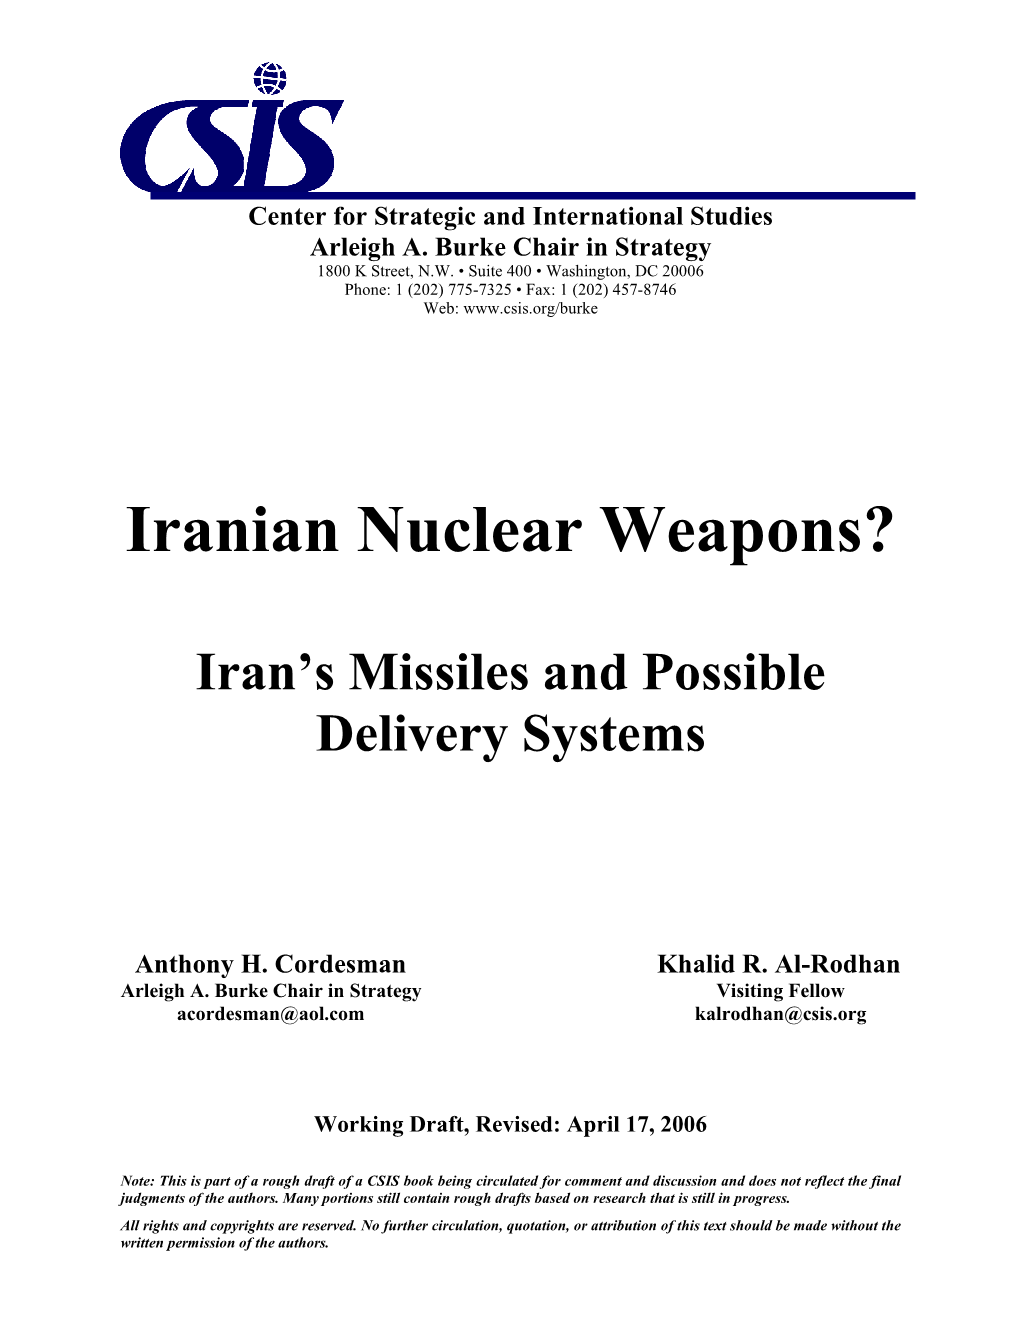 Iranian Nuclear Weapons? Iran's Missiles and Possible